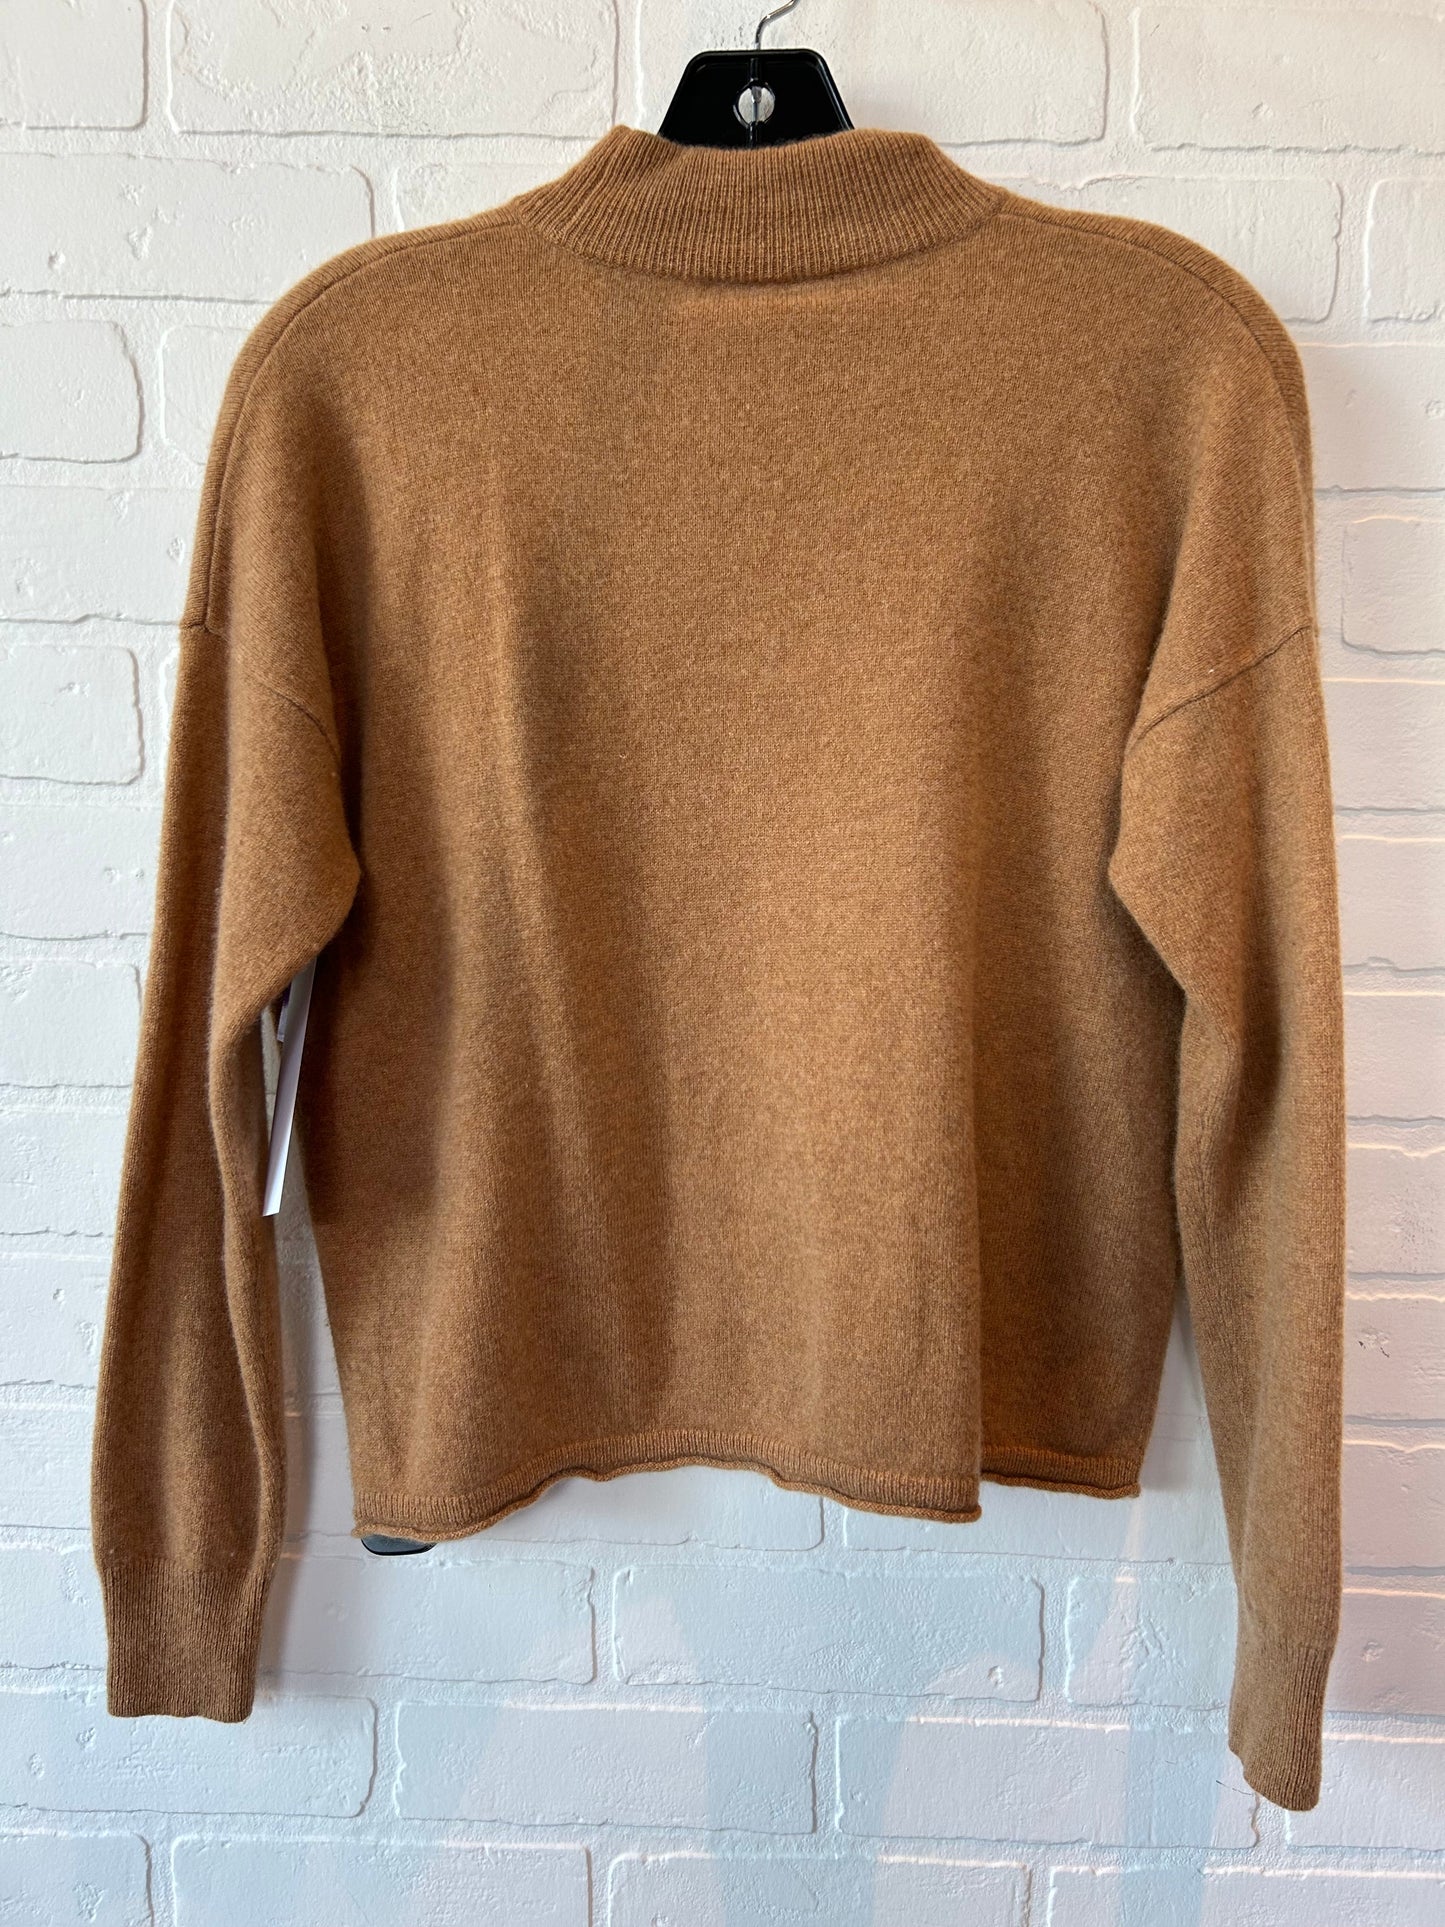 Brown Sweater Cashmere Madewell, Size S